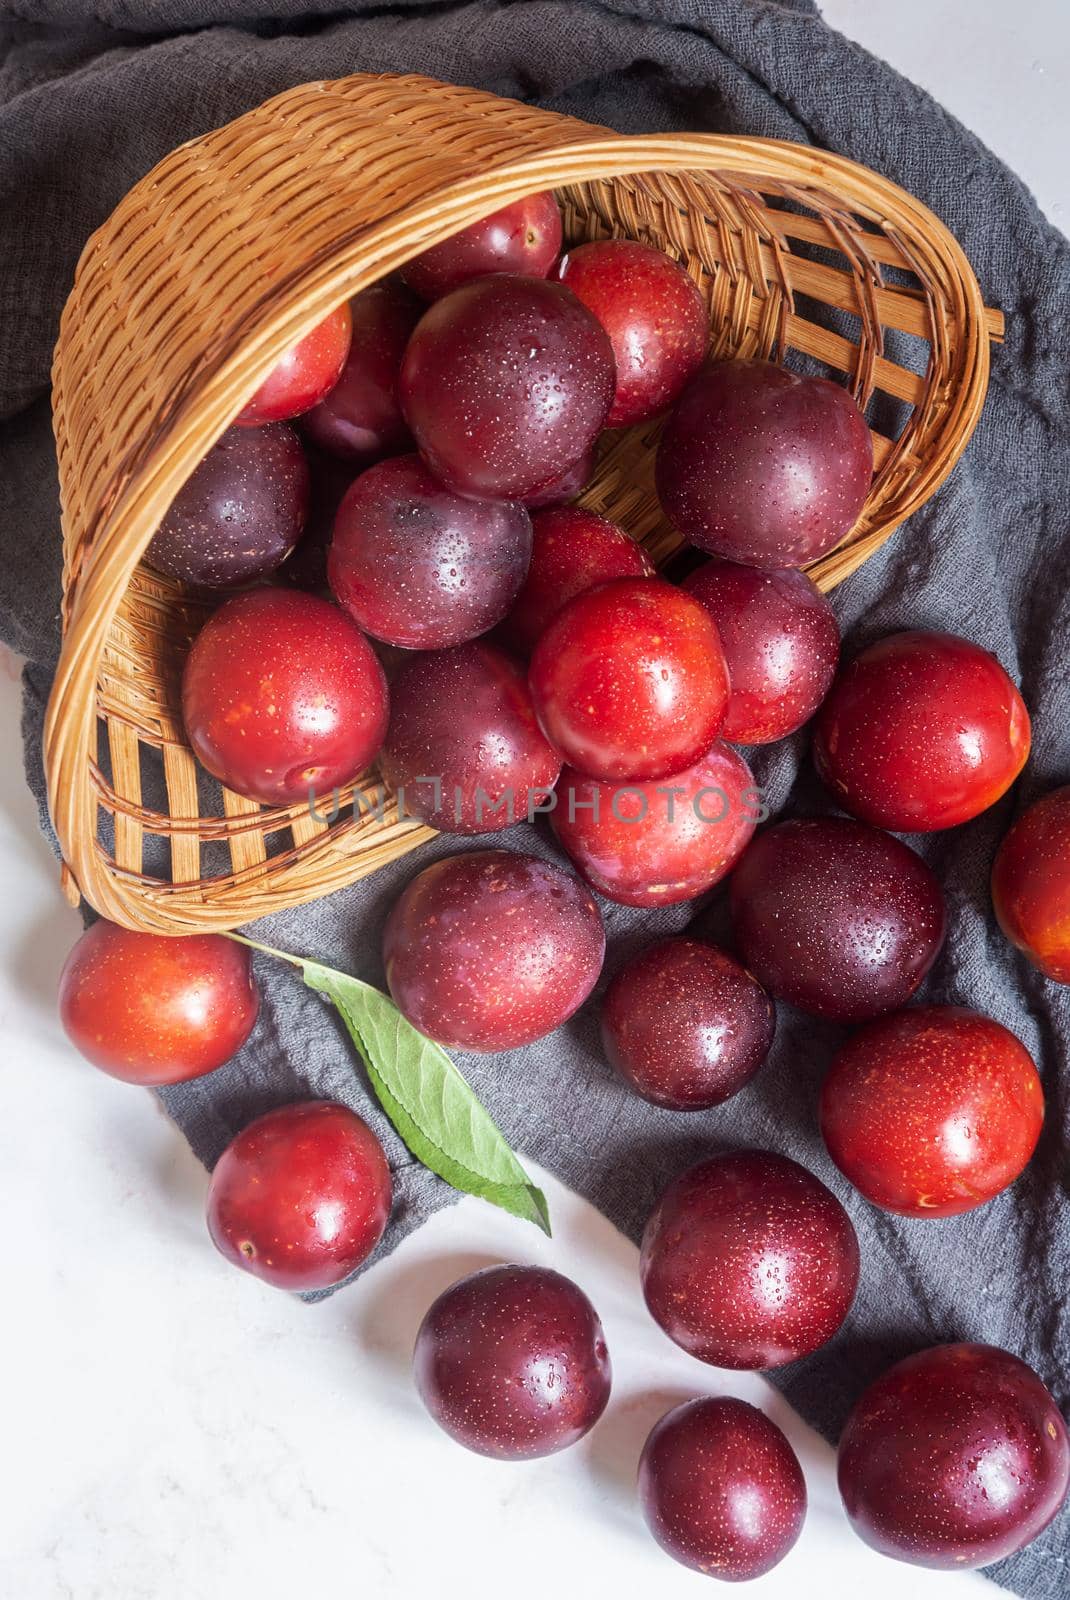 Large ripe plums spilled out of an overturned wicker basket onto a napkin on the table